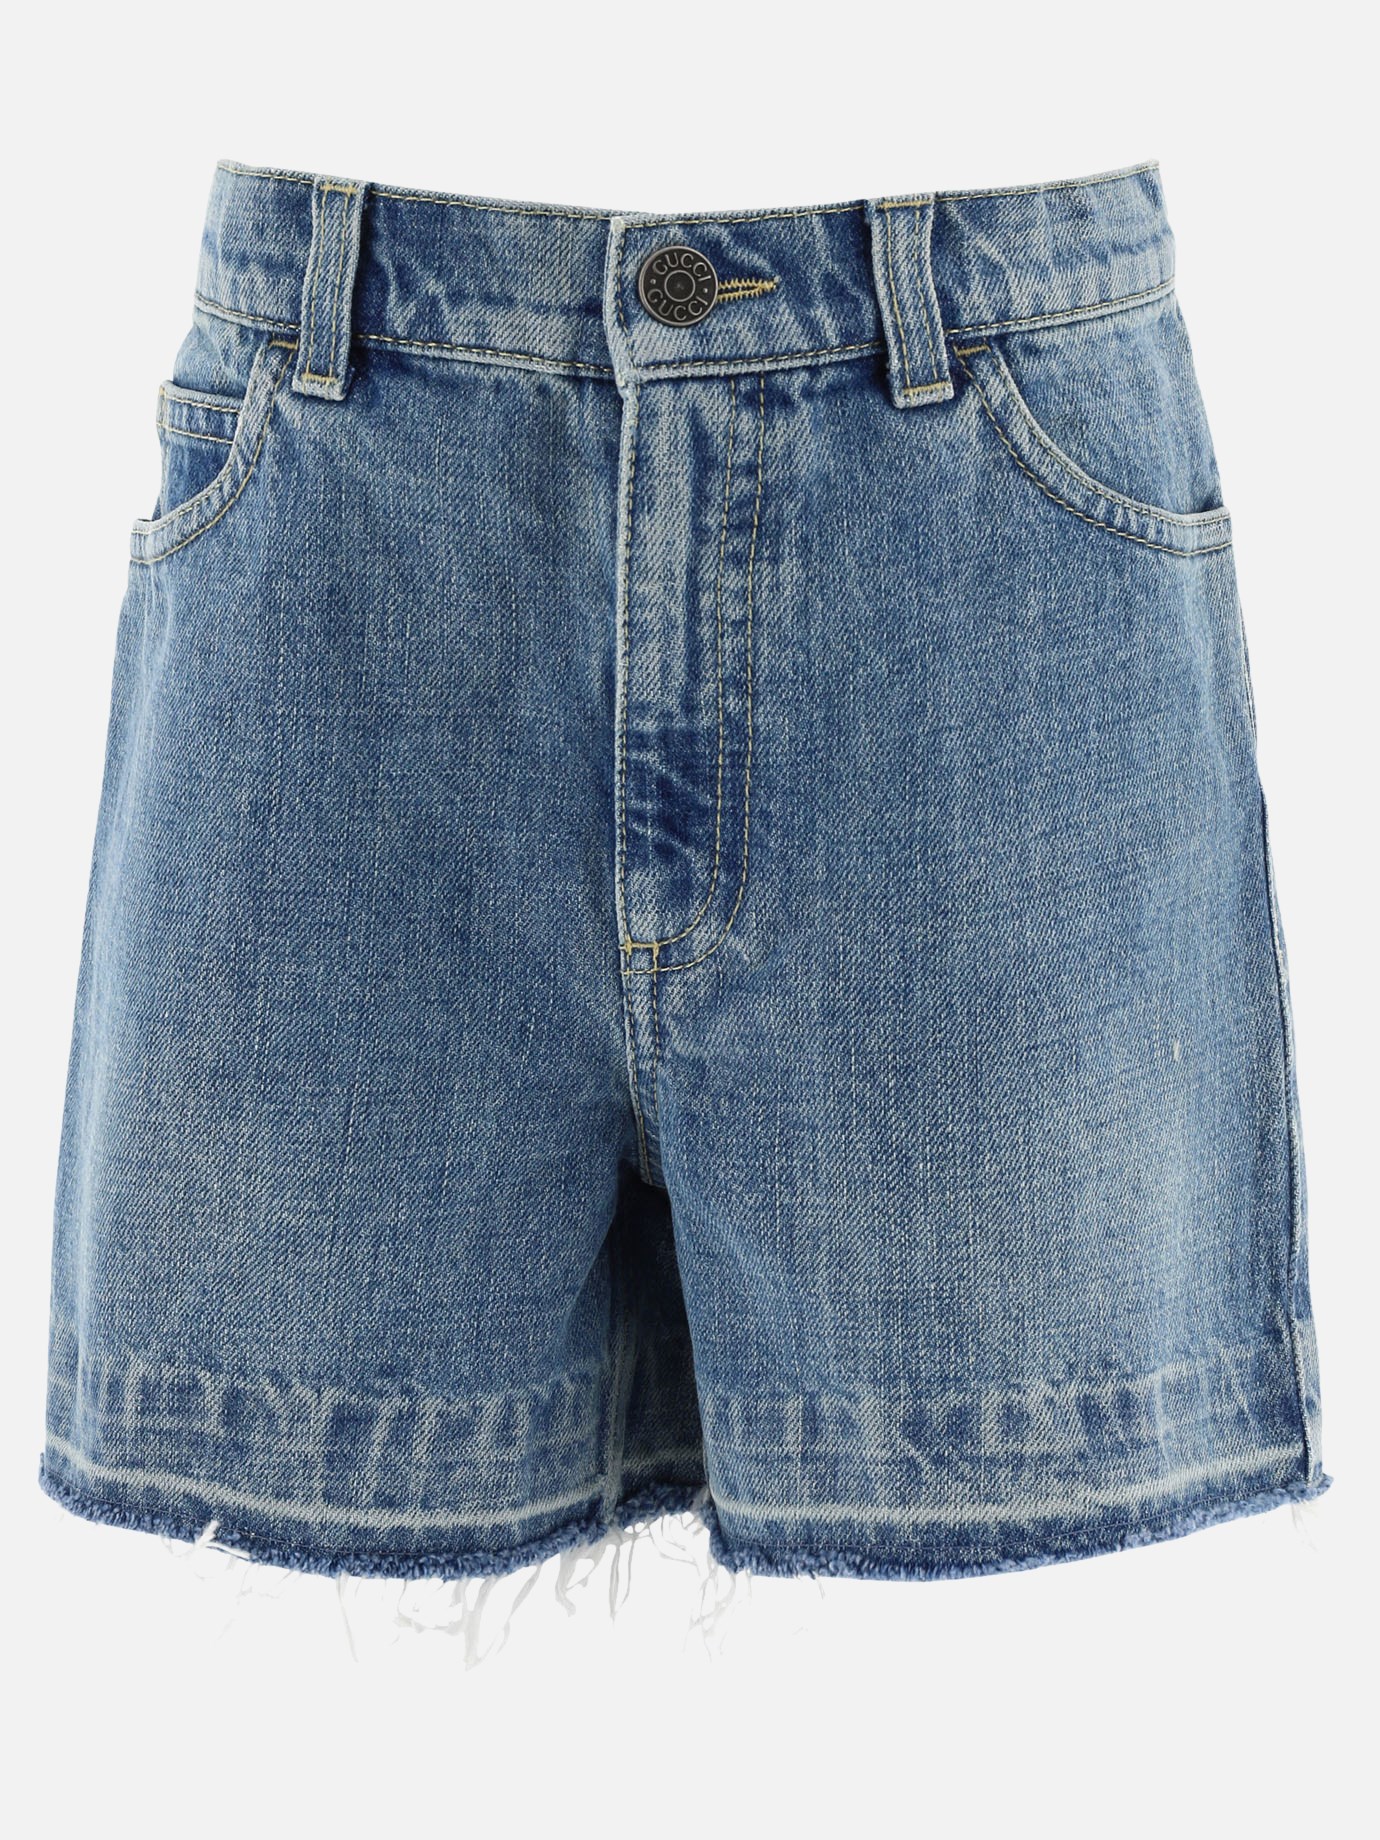 Shorts with horsebit by Gucci Kids